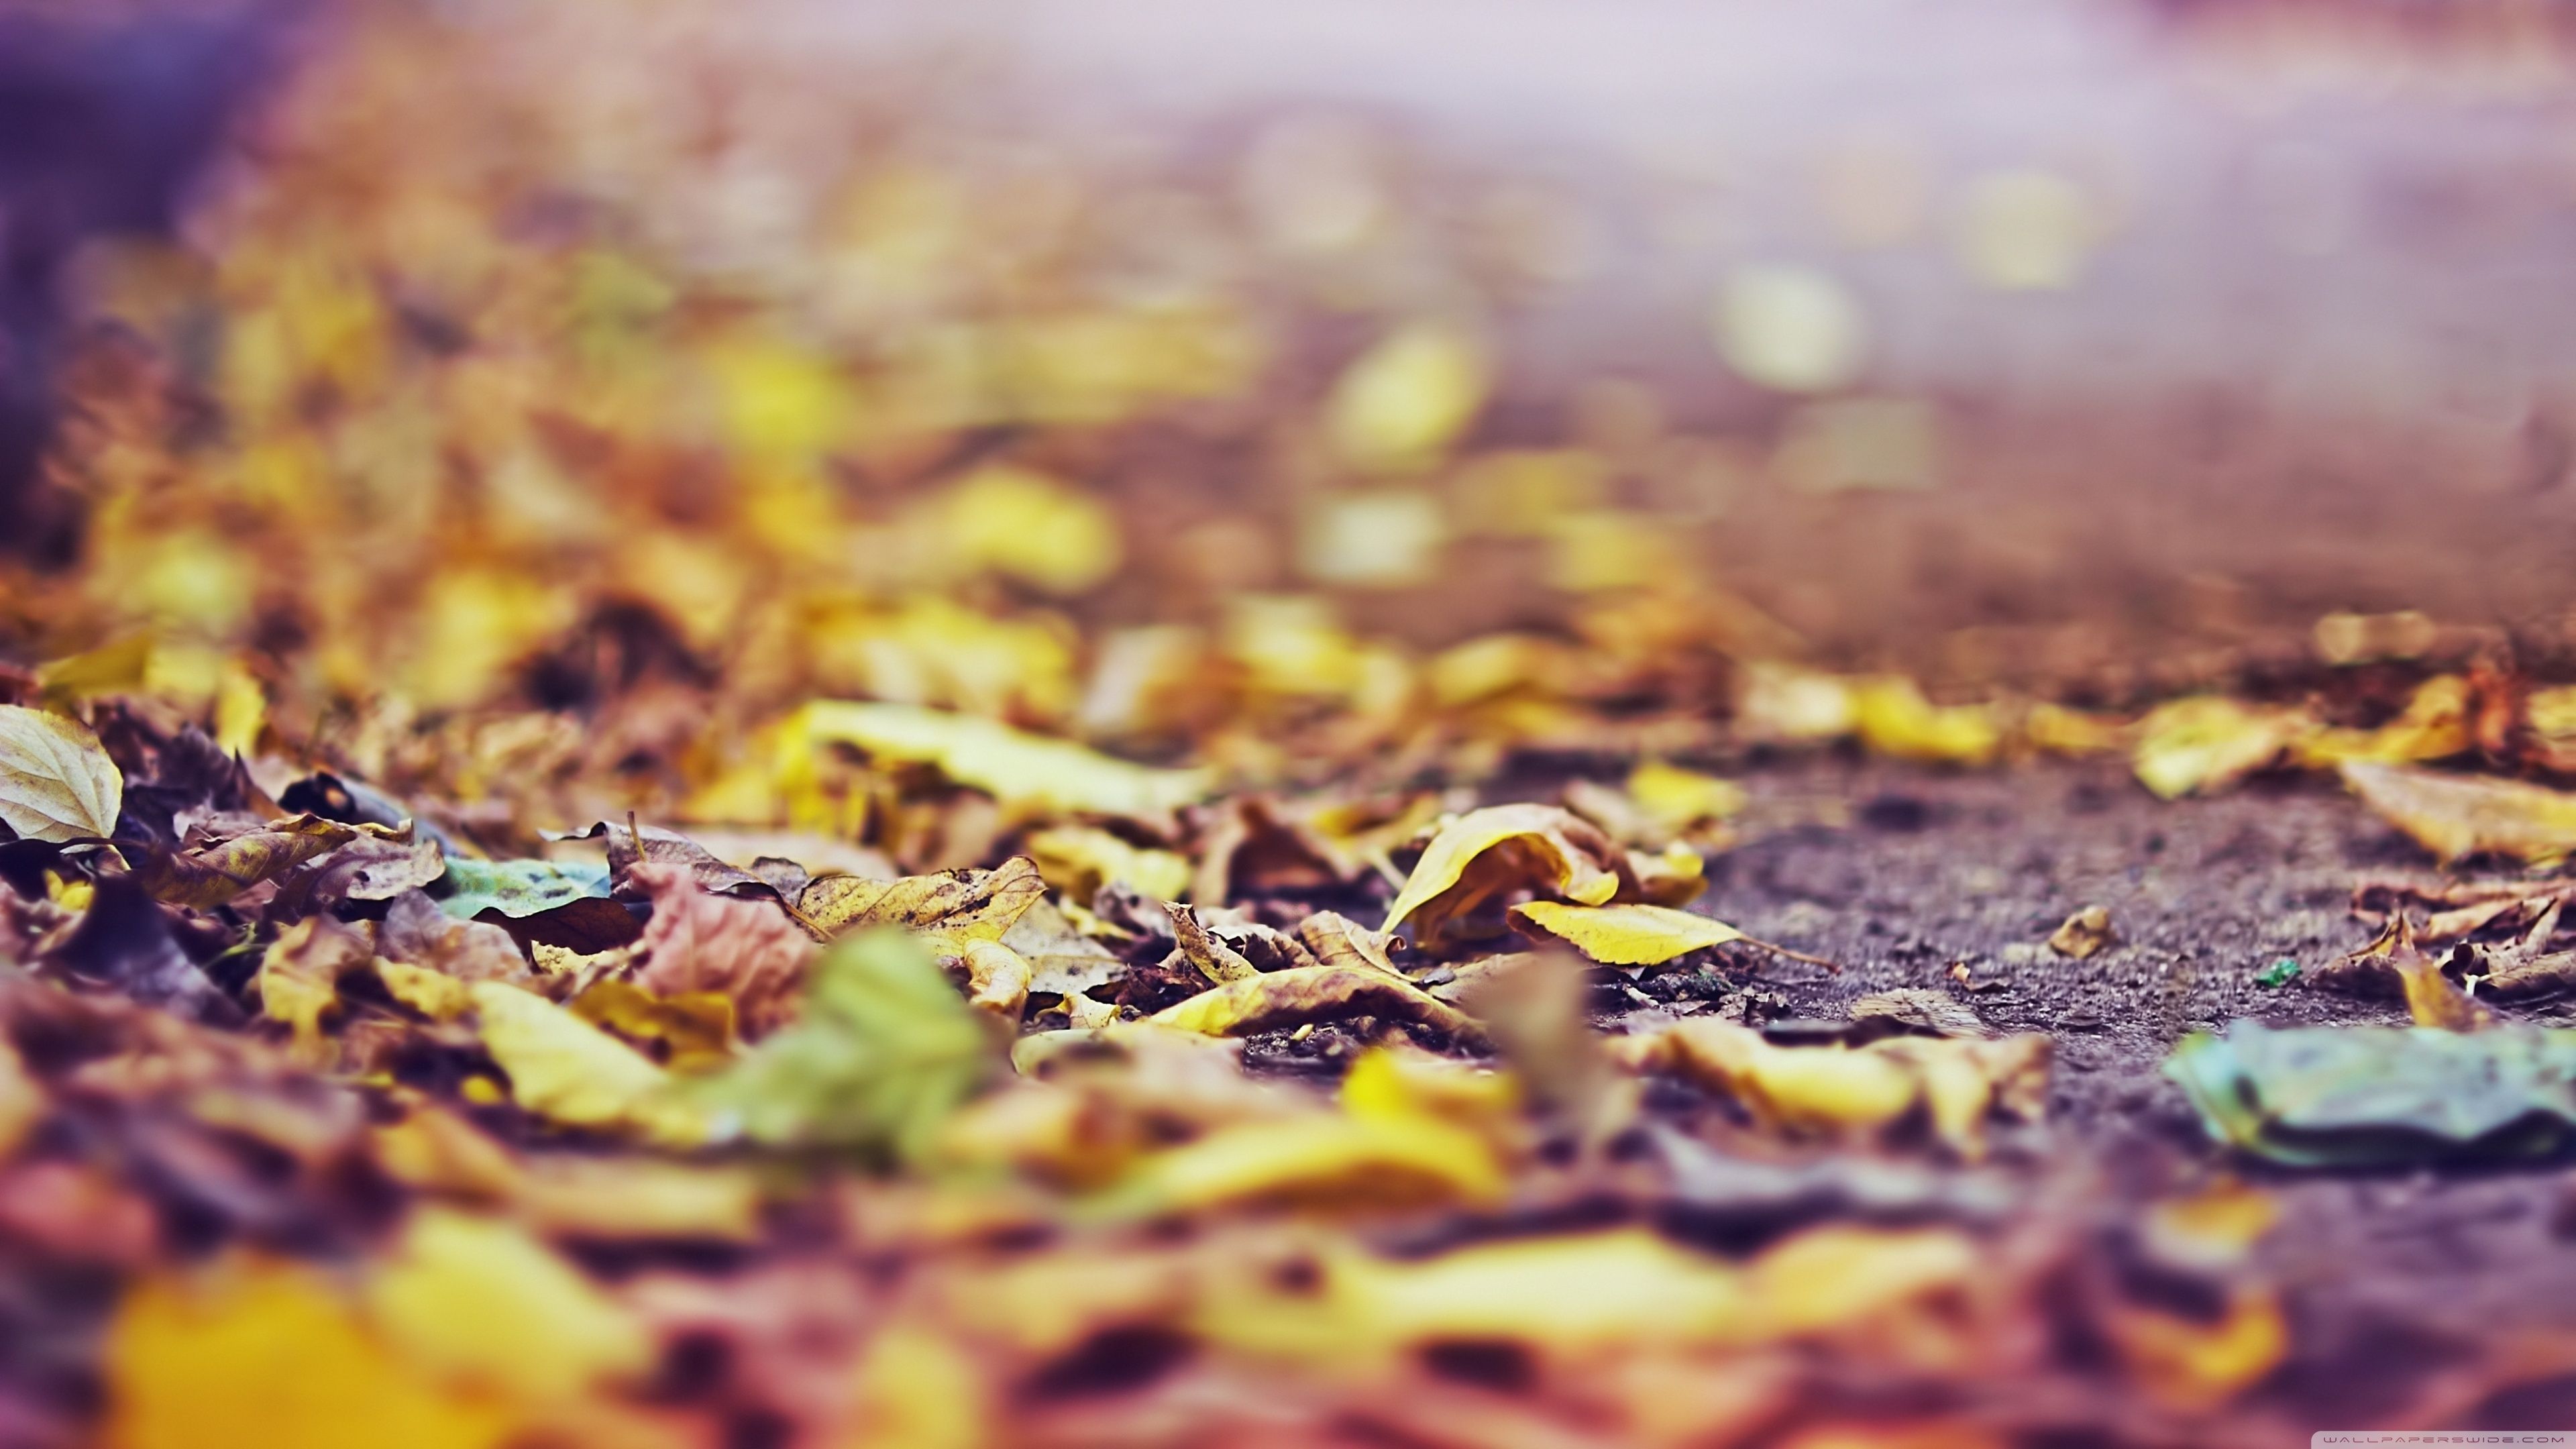 Yellow Leaves On The Ground Ultra HD Desktop Background Wallpaper for: Multi Display, Dual Monitor, Tablet